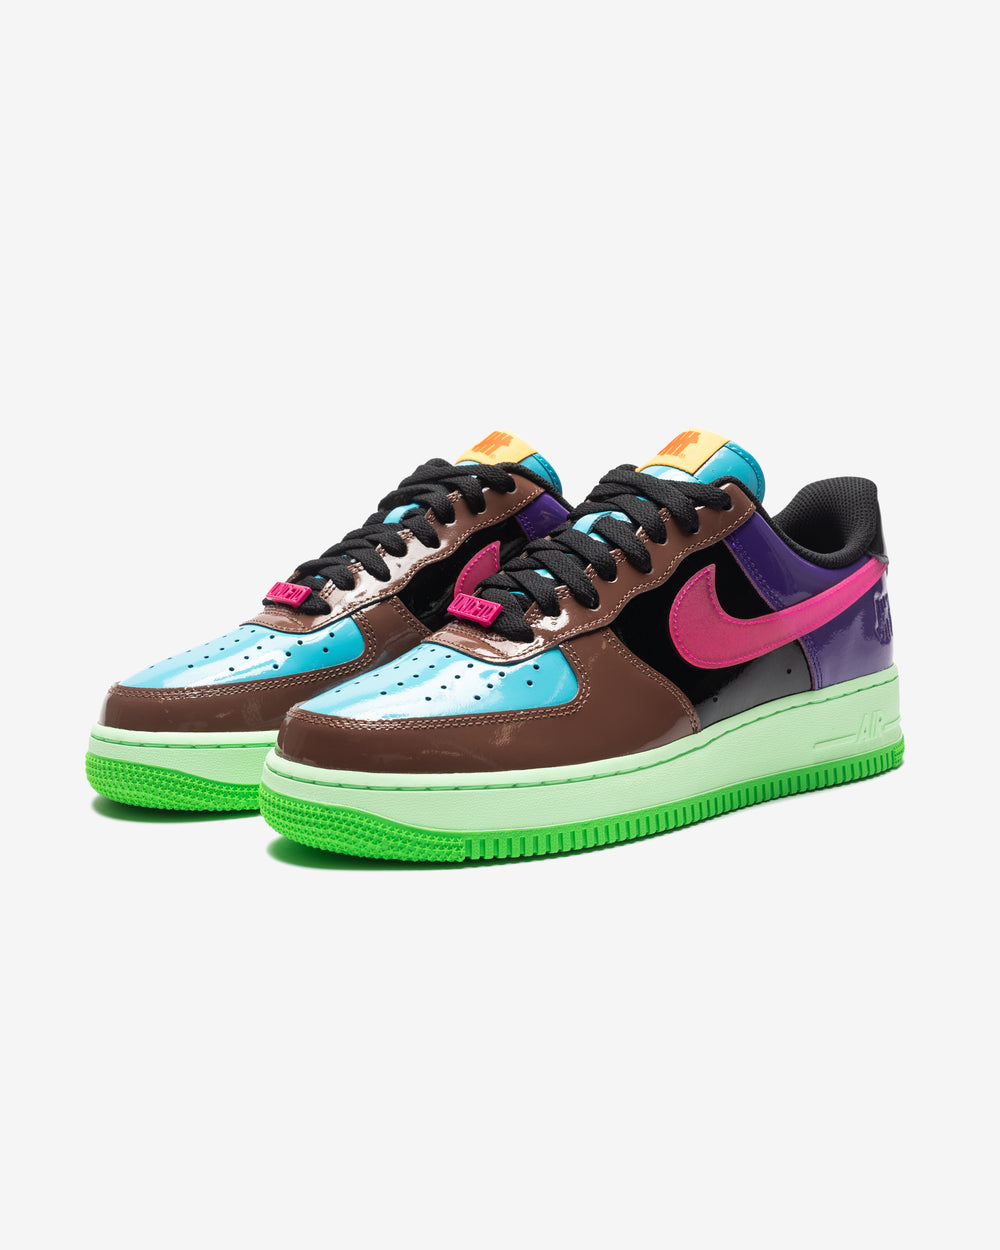 UNDEFEATED × NIKE AIR FORCE 1 LOW SP